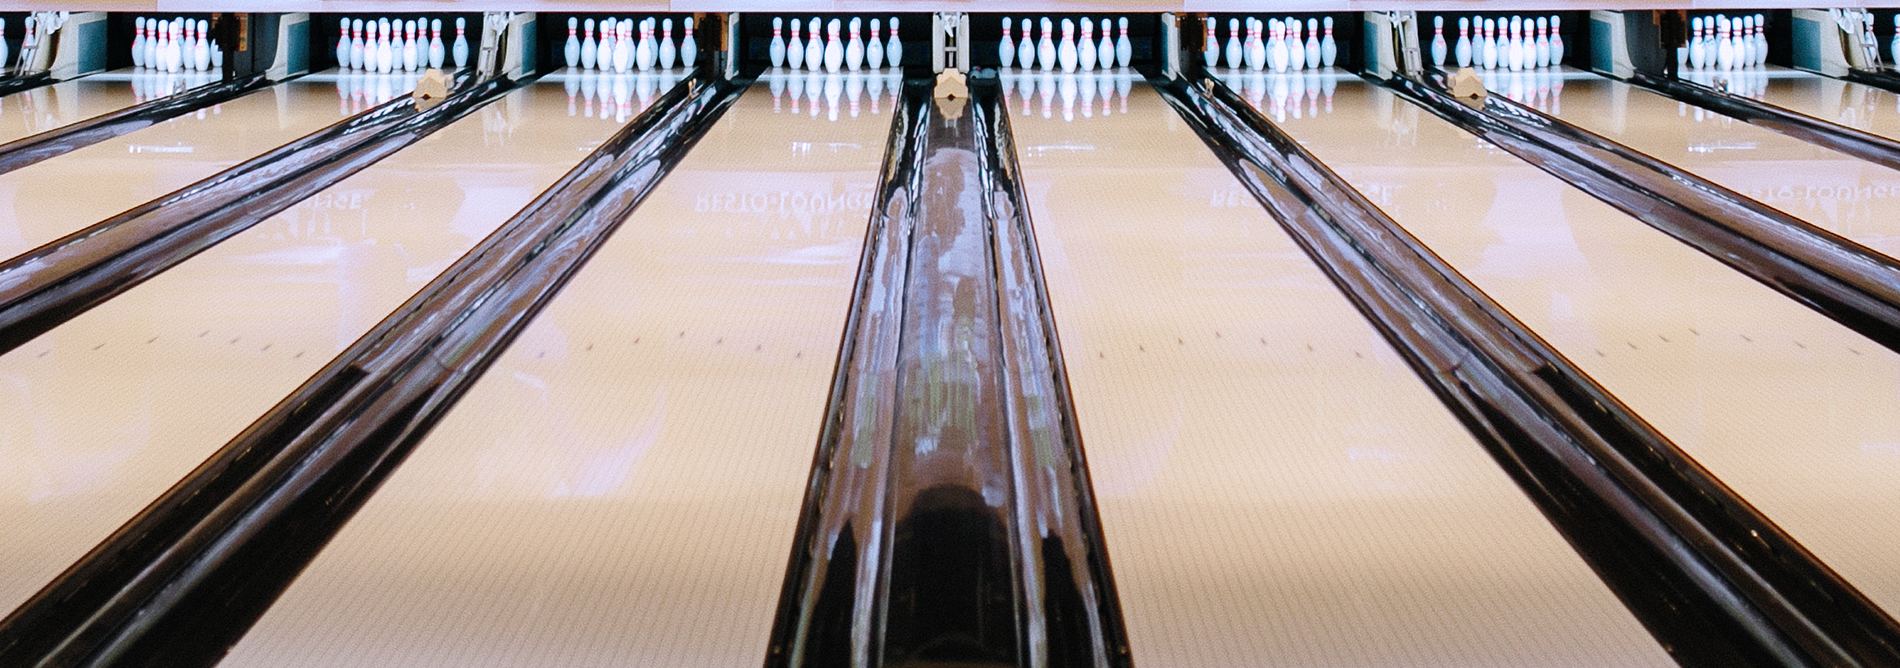 Bowling-QubicaAMF-lanes-spl-boutique-banner.jpg